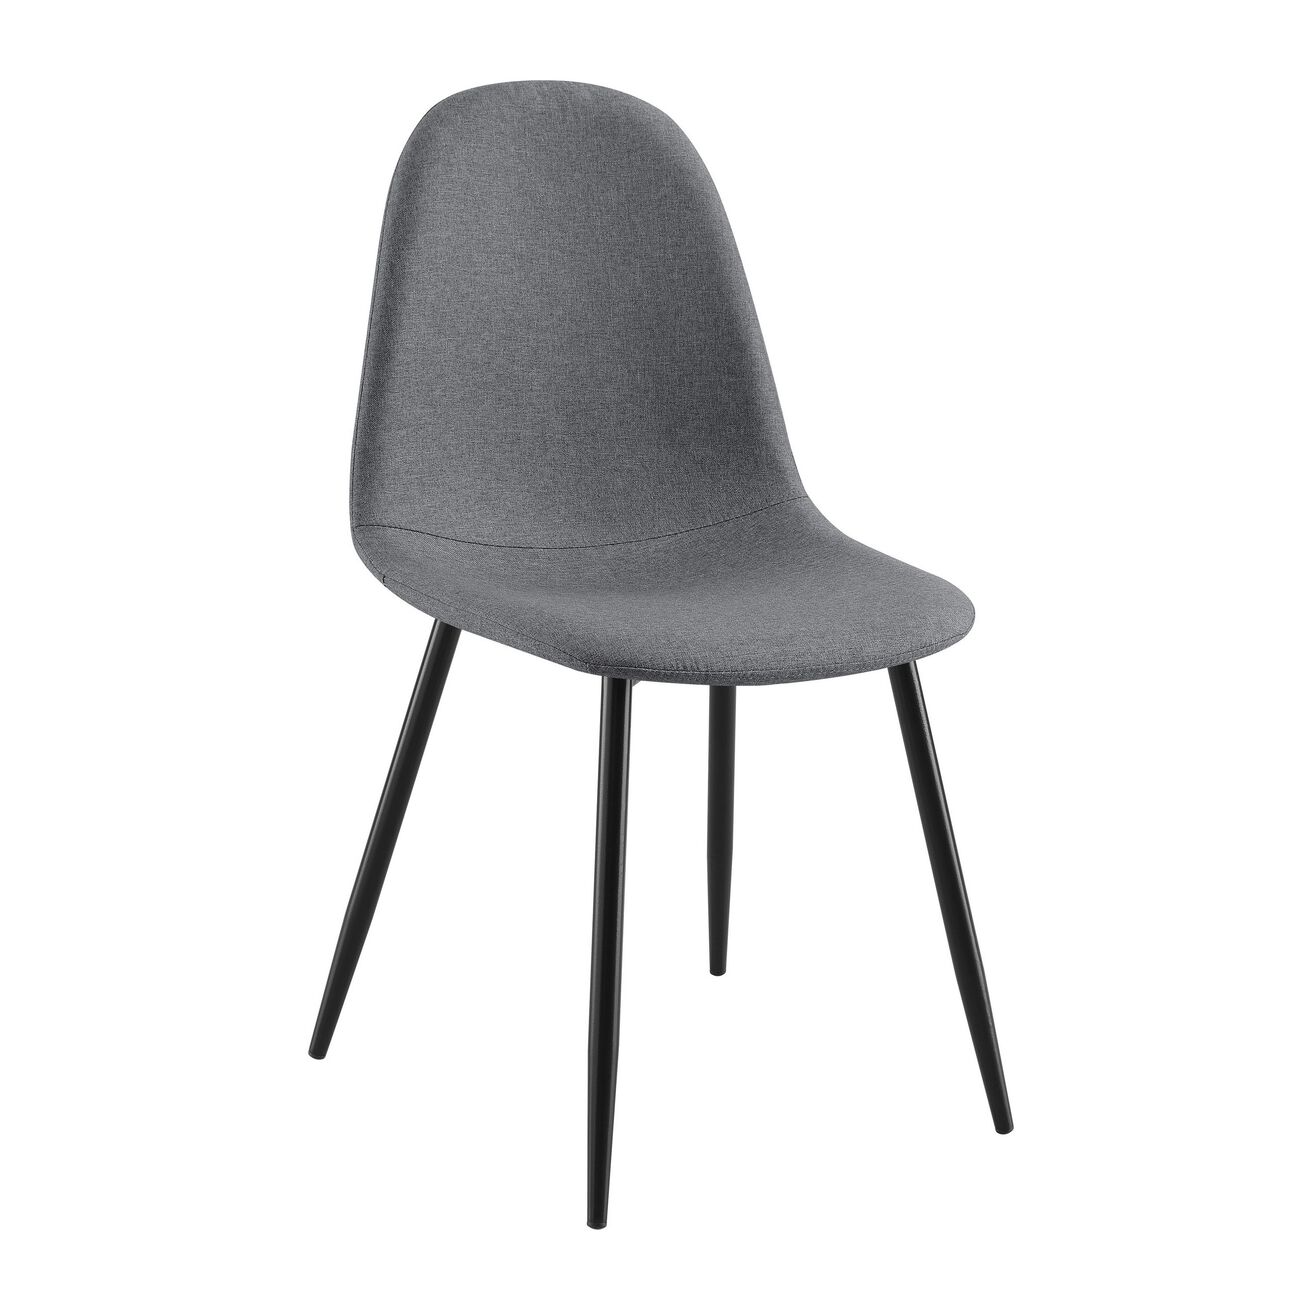 Fabric Dining Chair with Bucket Seating, Set of 4, Gray and Black